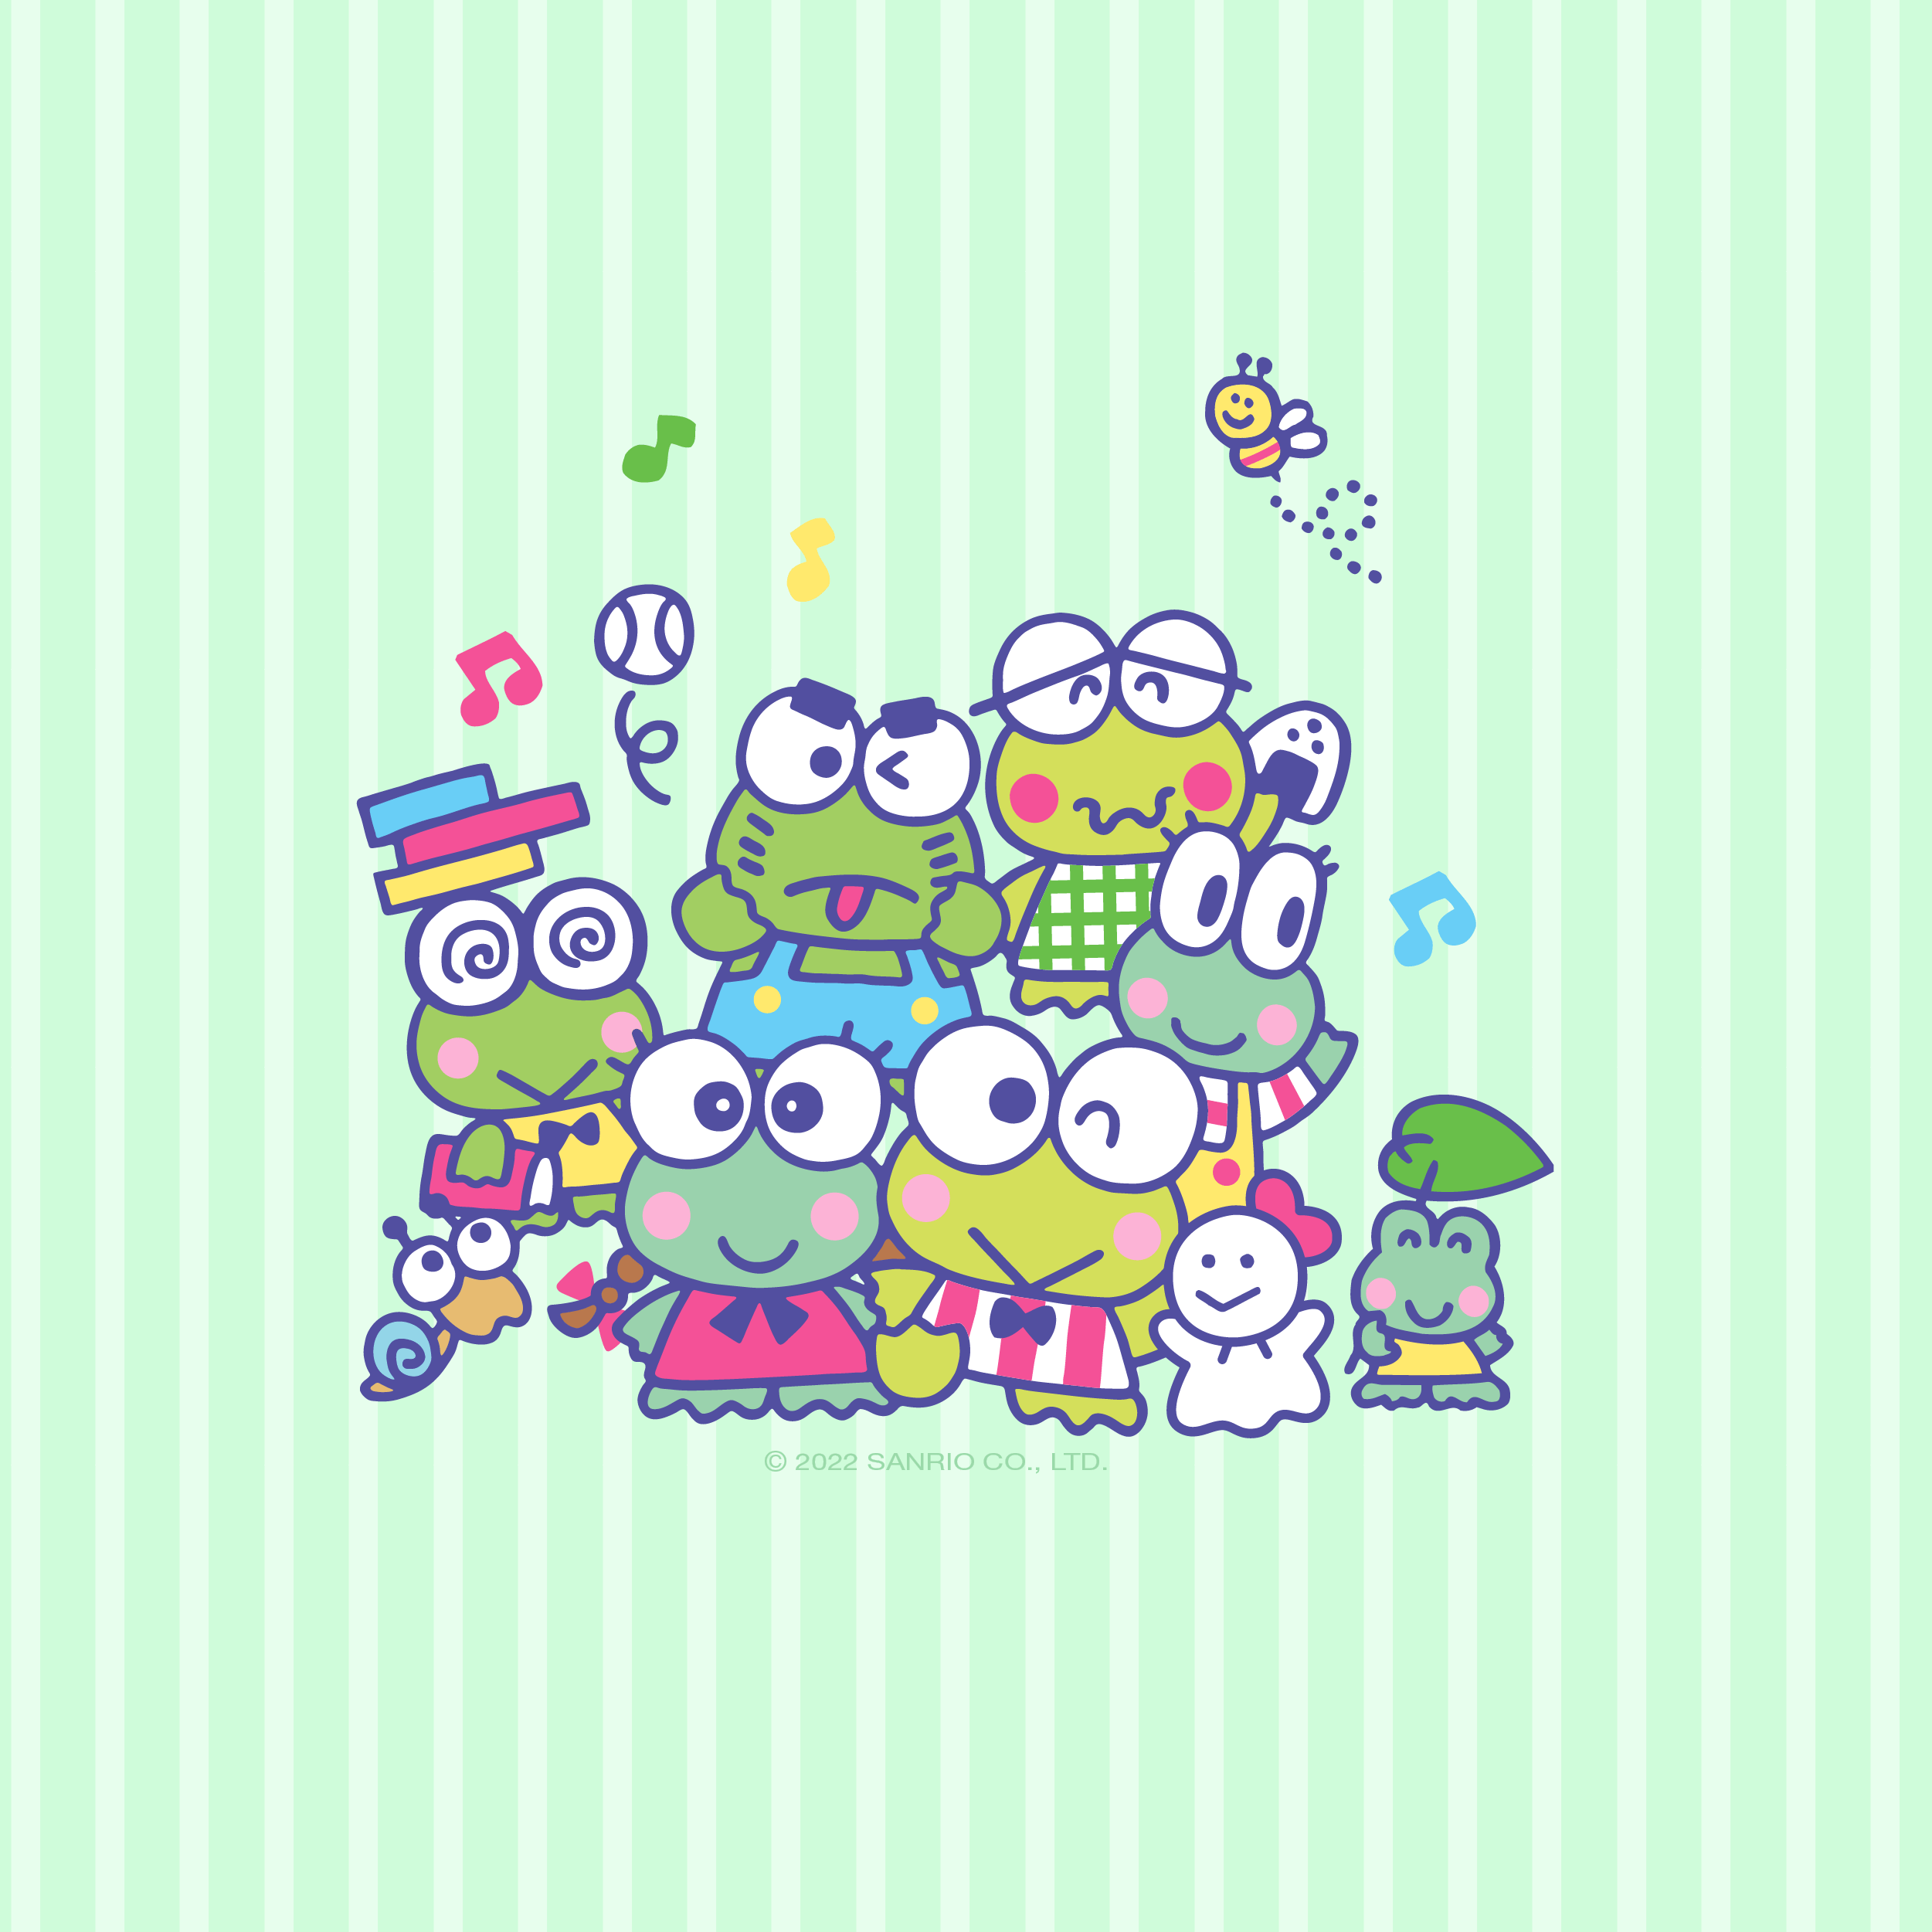 Sanrio #Keroppi on the go with new background for your phone!